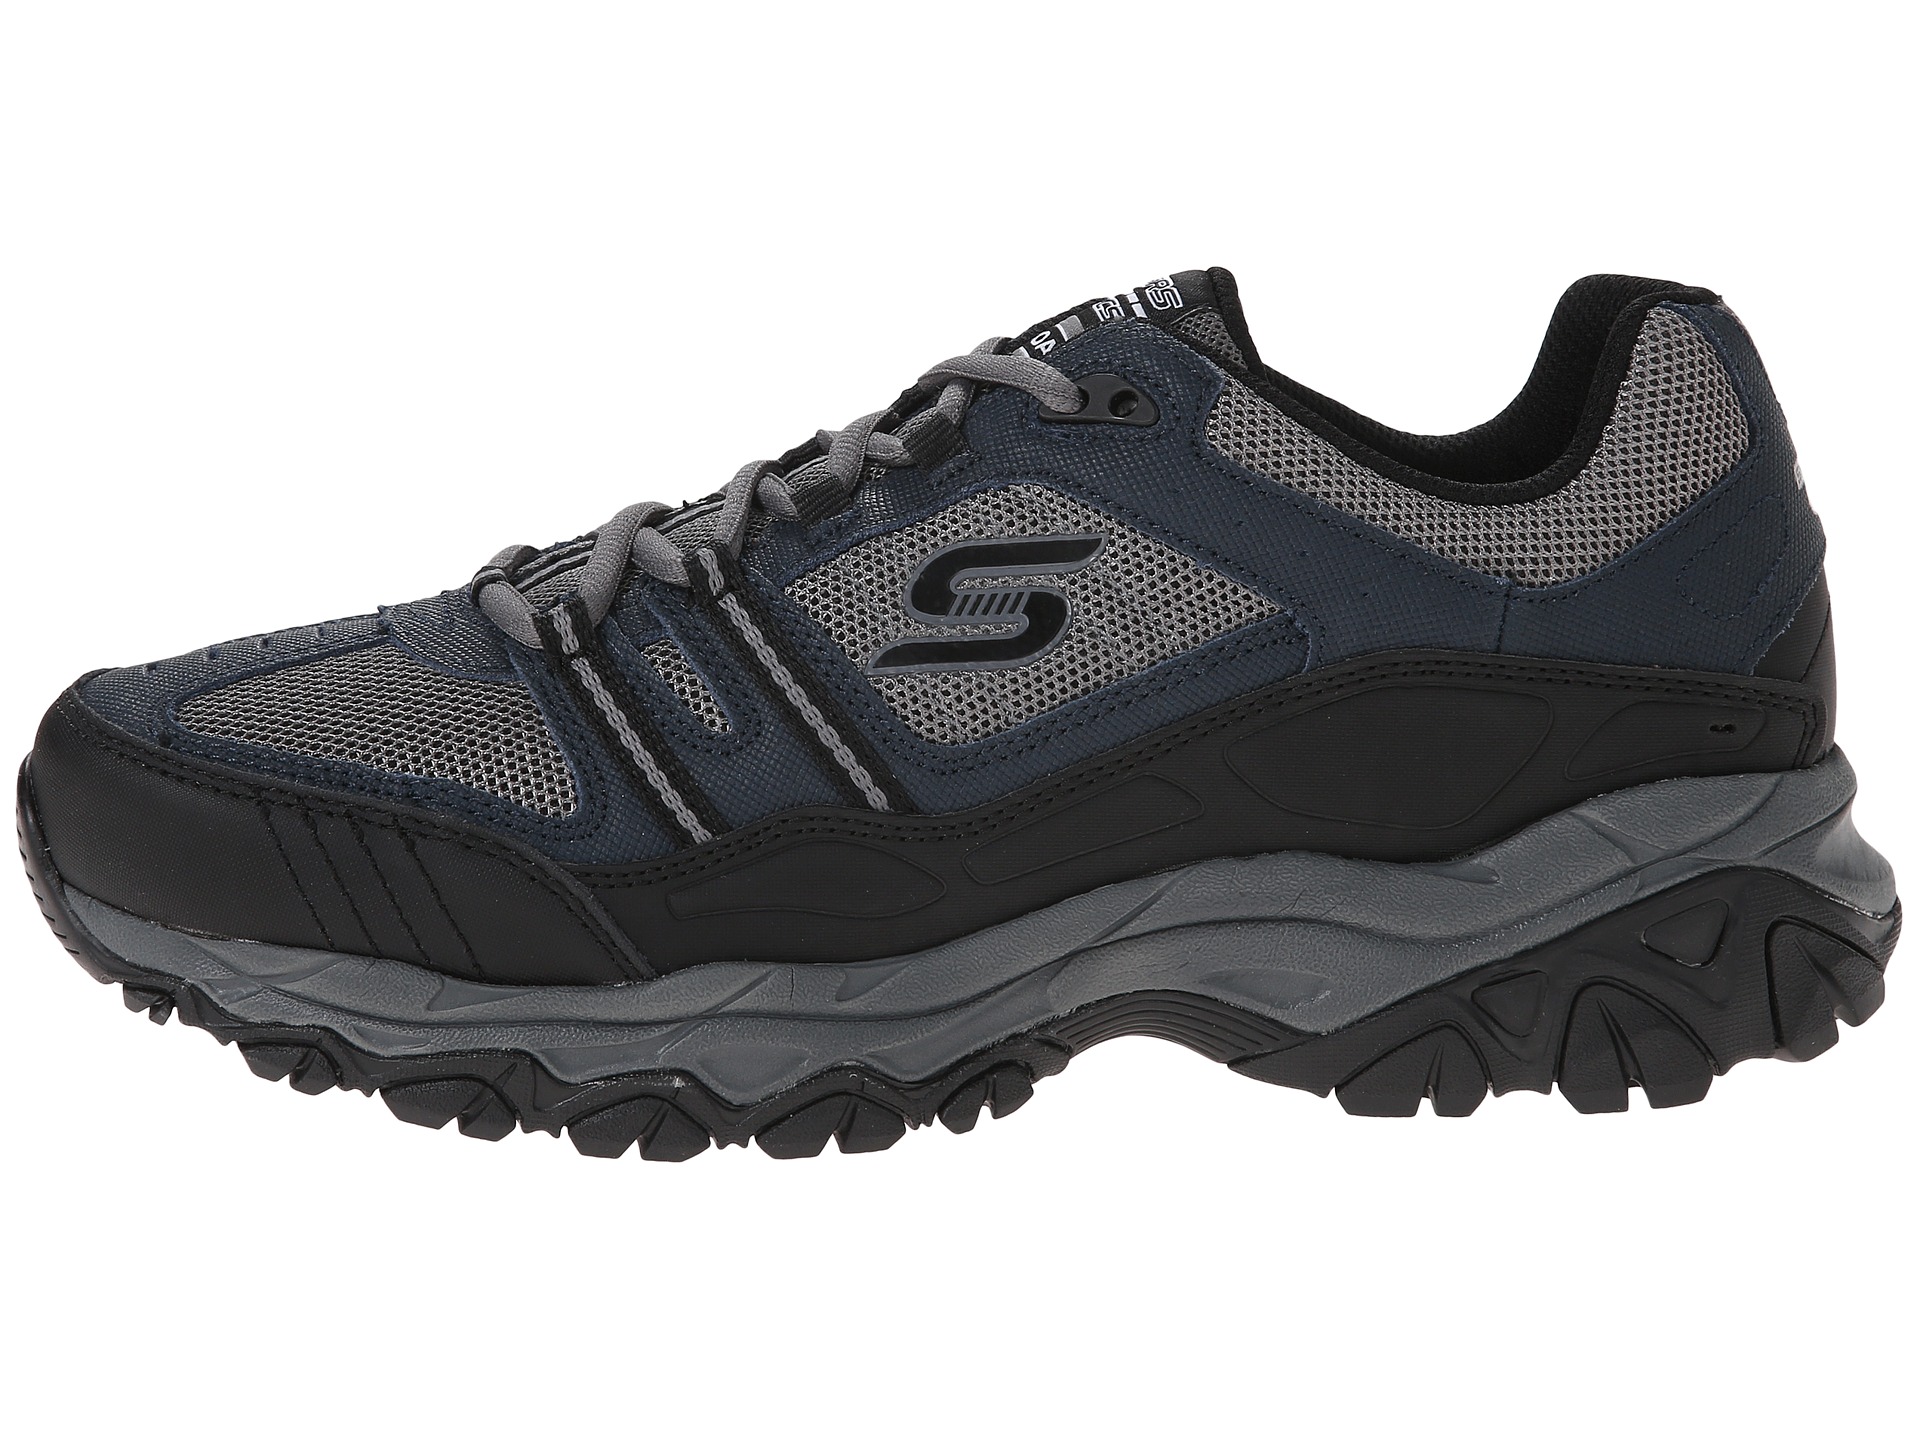 SKECHERS Afterburn M. Fit Strike Off Navy/Gray - Zappos.com Free ...